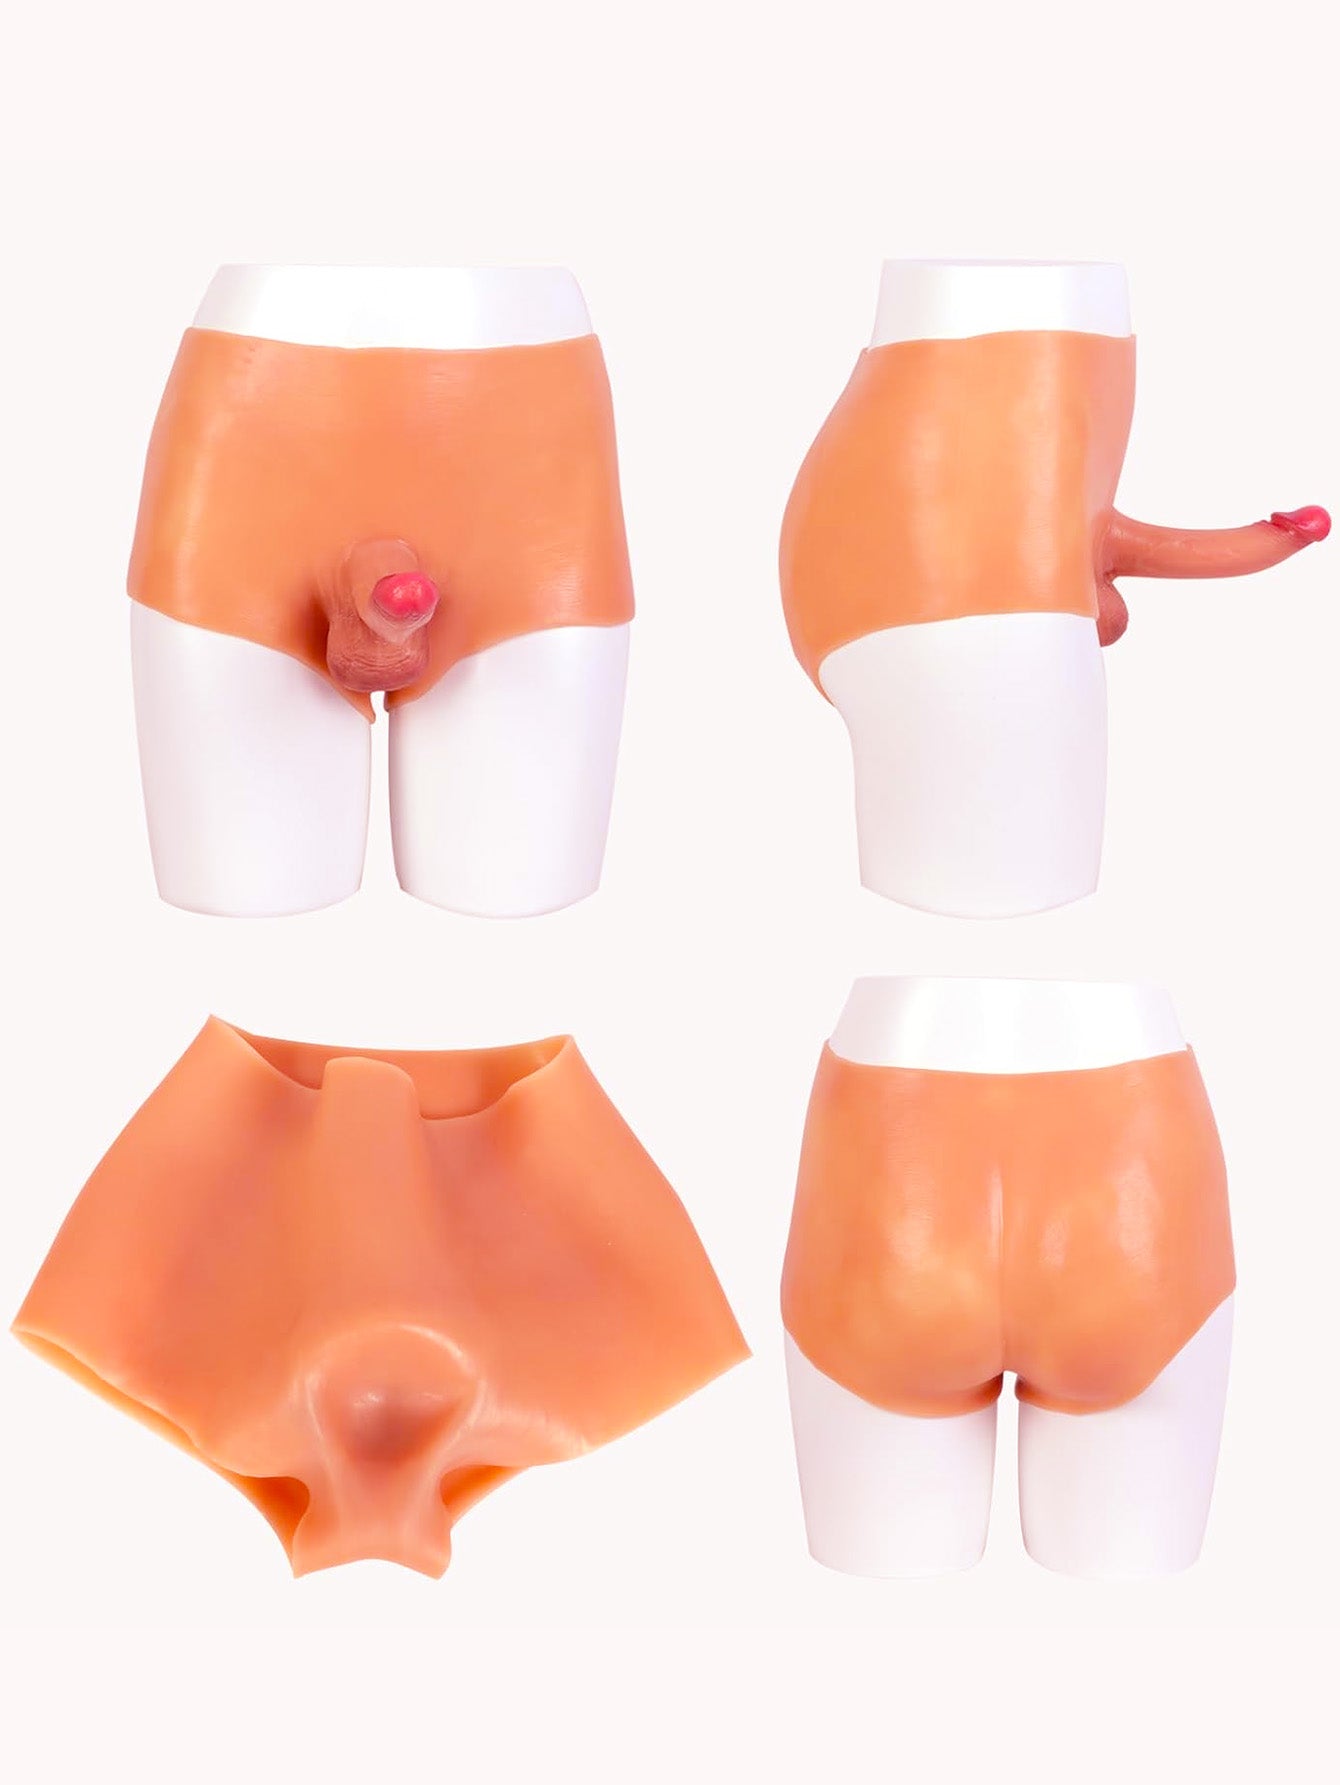 Strap On Realistic Dildo Pants - Wearable Silicone Couple Sex Toys for Lesbian Gifts